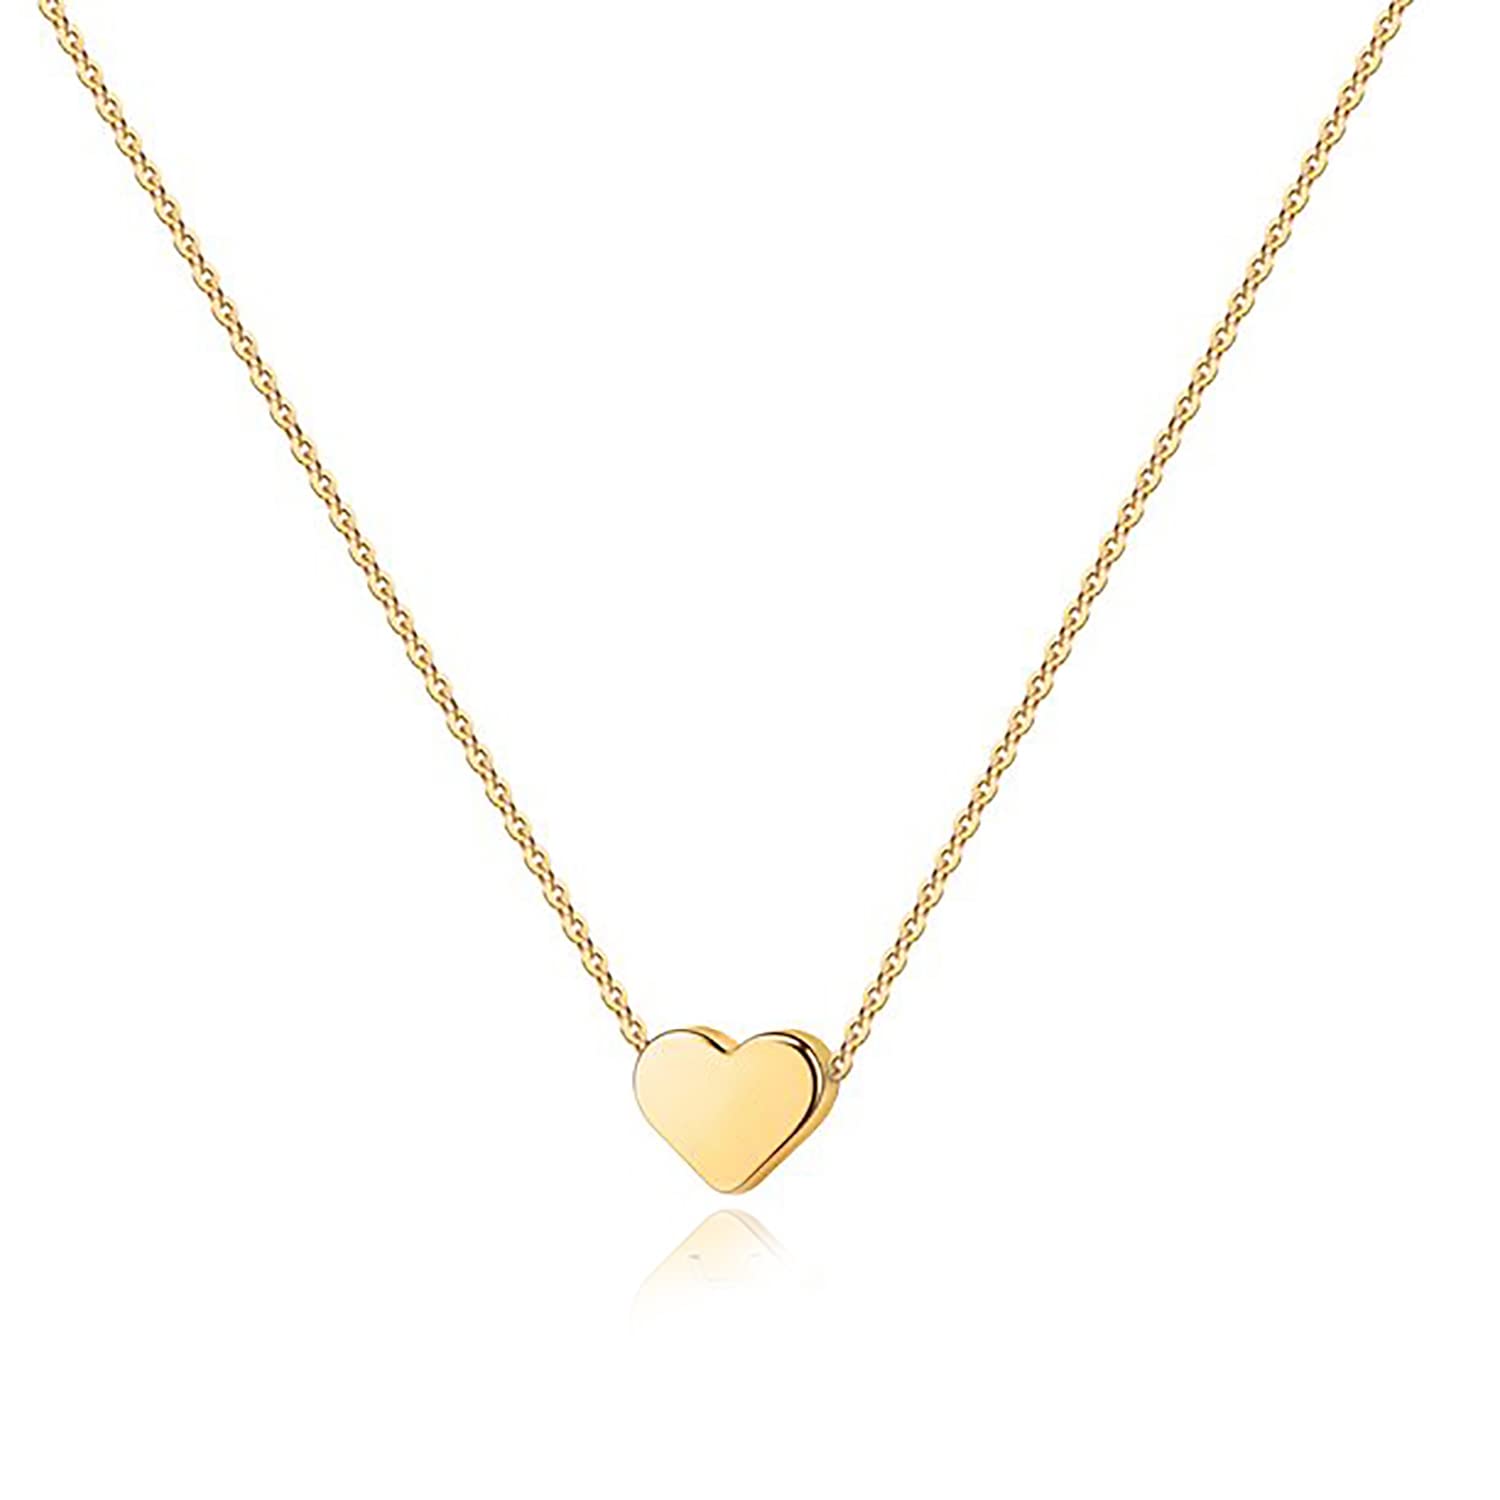 PAVOI 14K Gold Plated Cubic Zirconia Heart Necklace | Cute Dainty Love Pendant Necklaces for Women